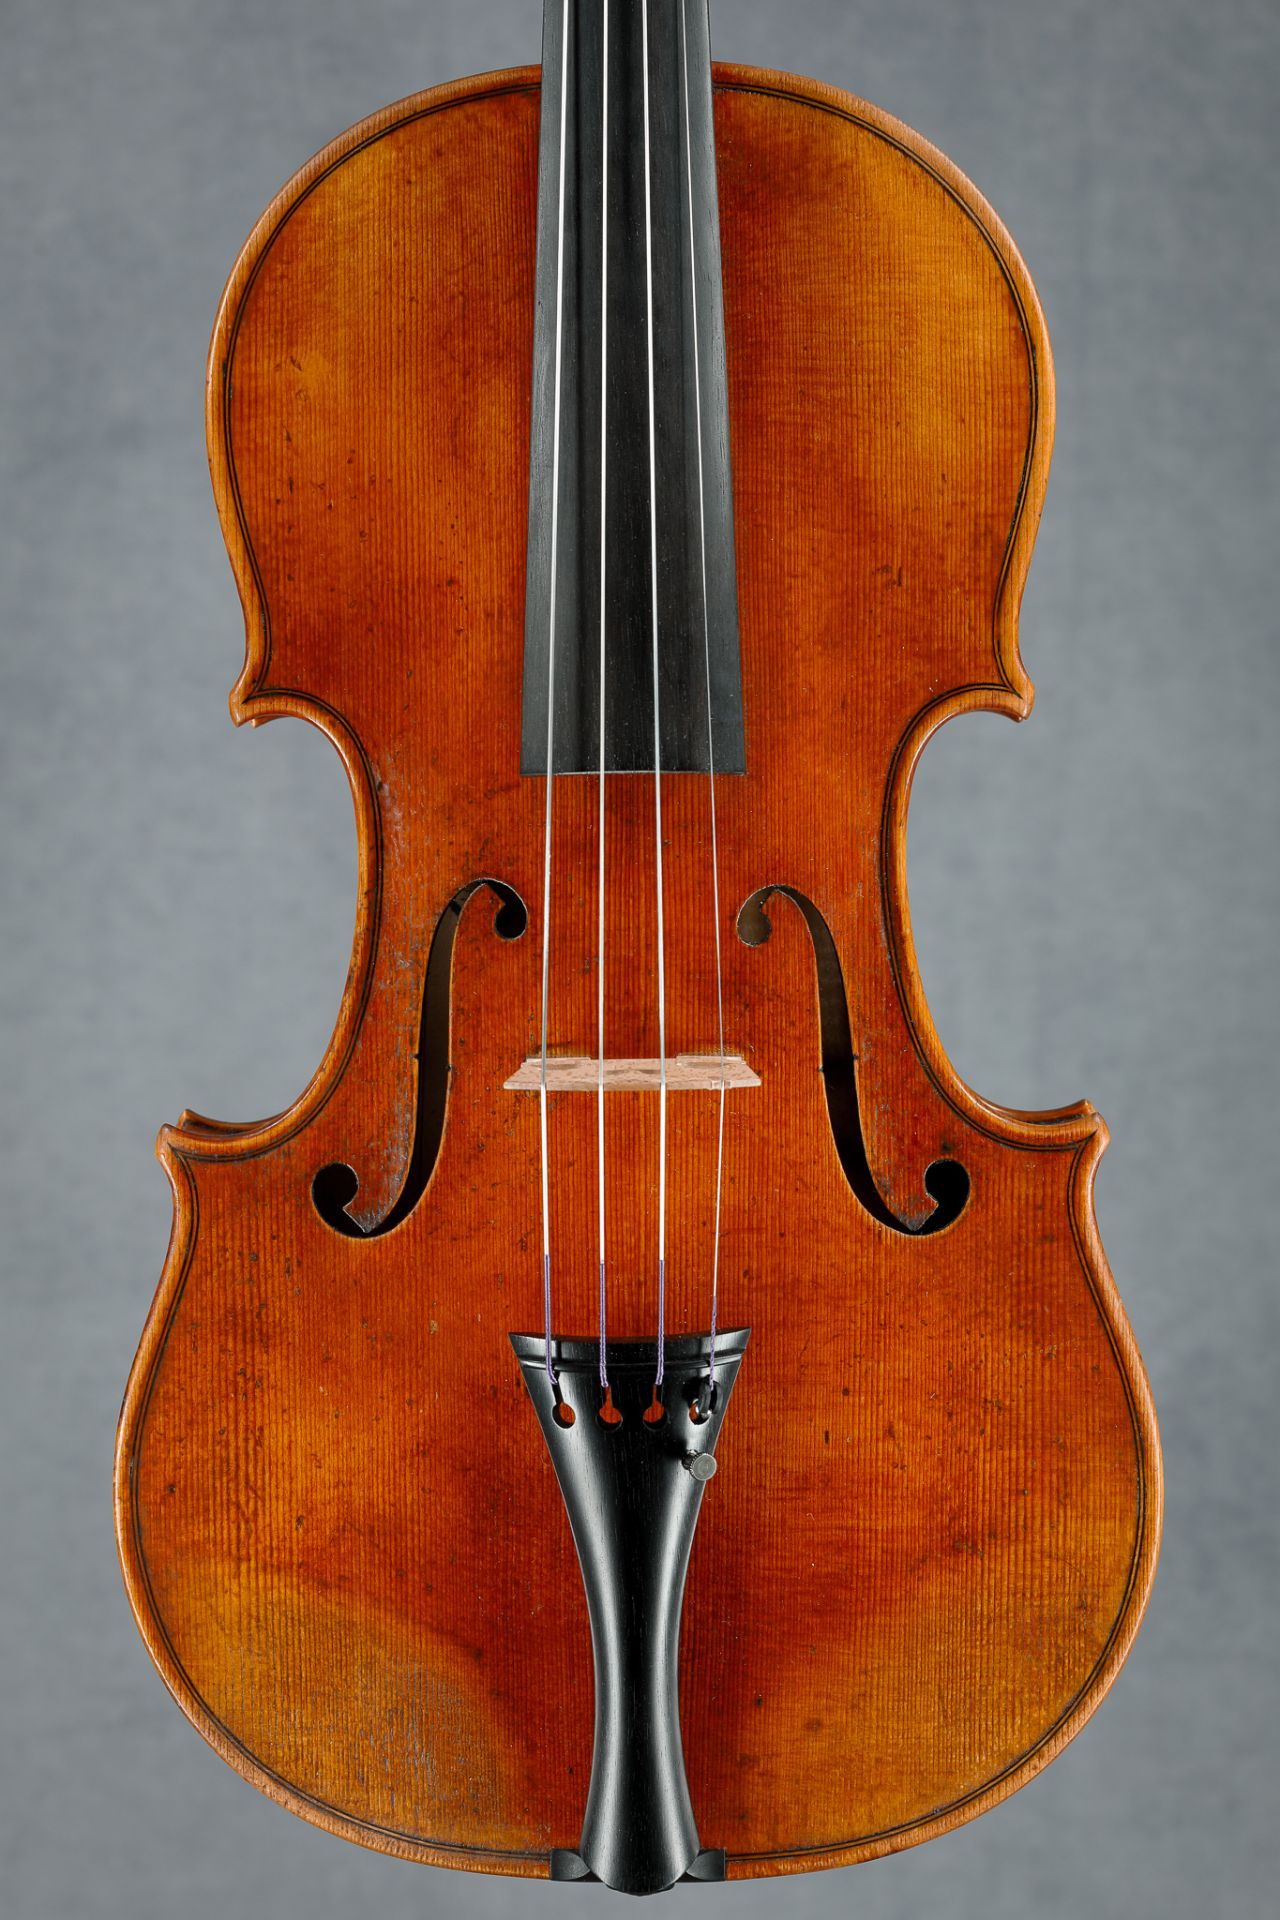 *Ian Crawford McWilliams, Germany - Berlin, 2019 先日ご紹介した[https://www.shimamura.co.jp/shop/repair-violin/product-other/20190707/2829::title=Frédéric Ch […]